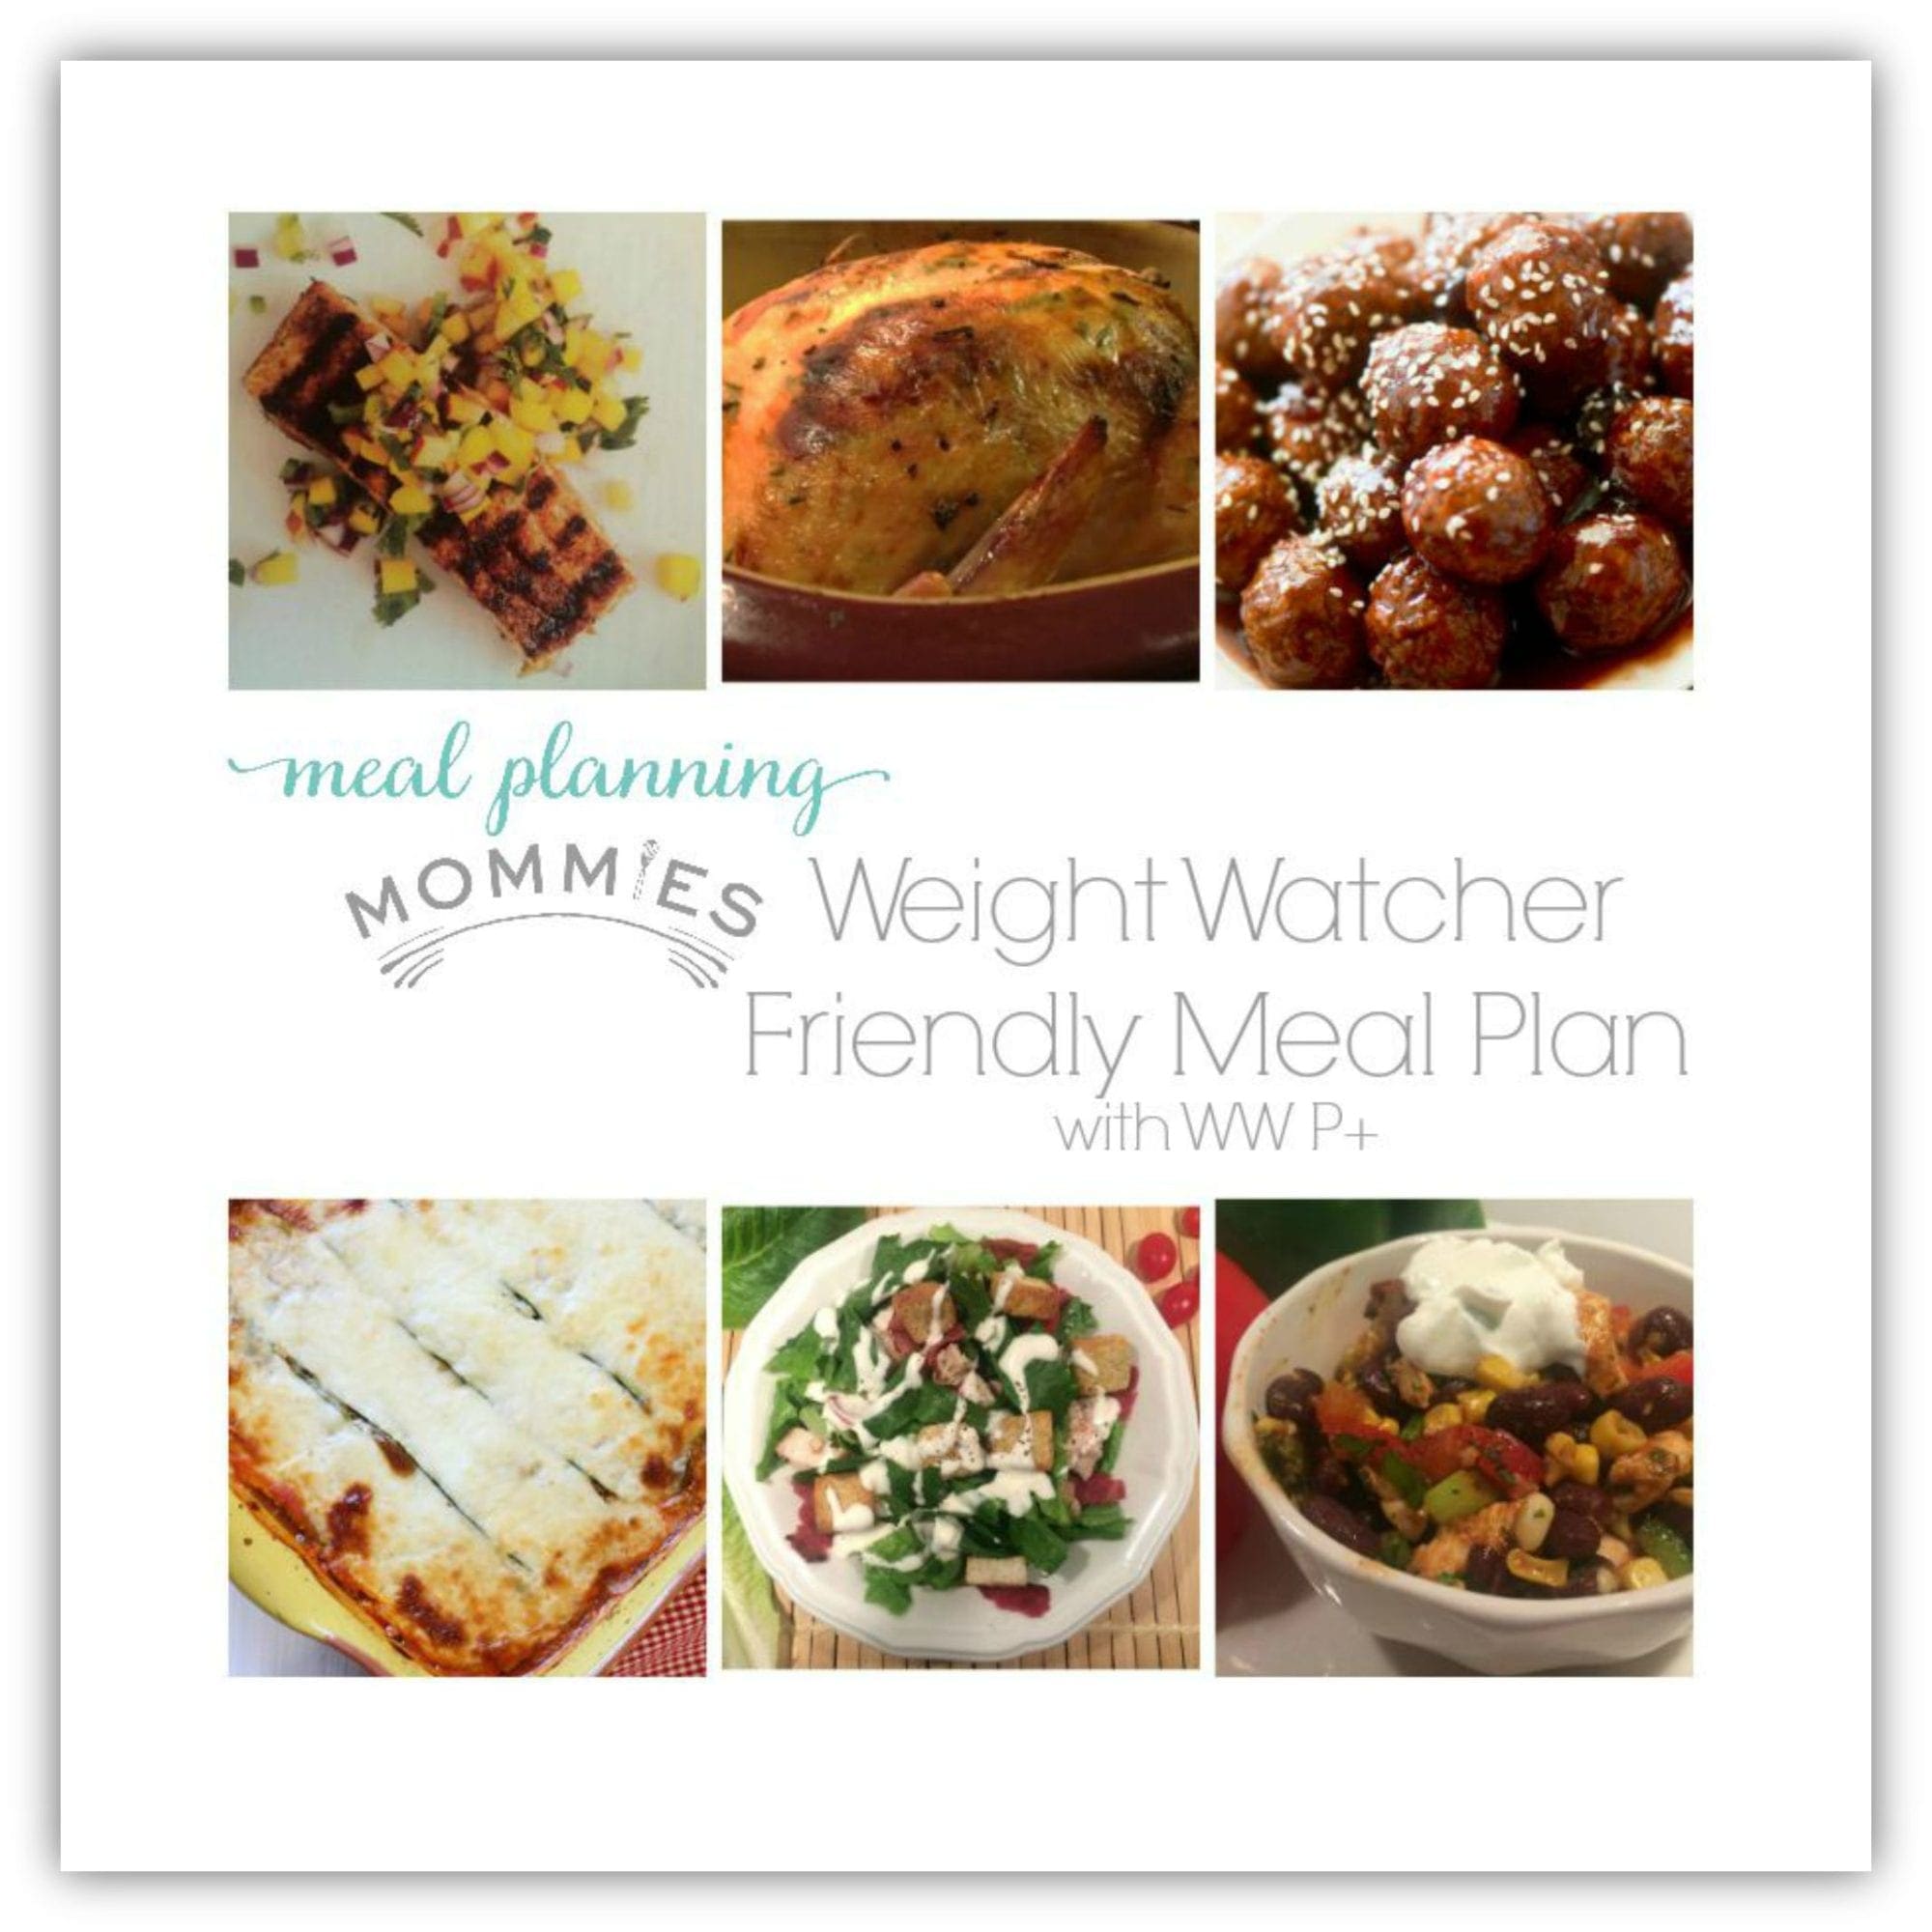 Weight Watcher Friendly Meal Plan with WW P+ Meal Planning Mommies